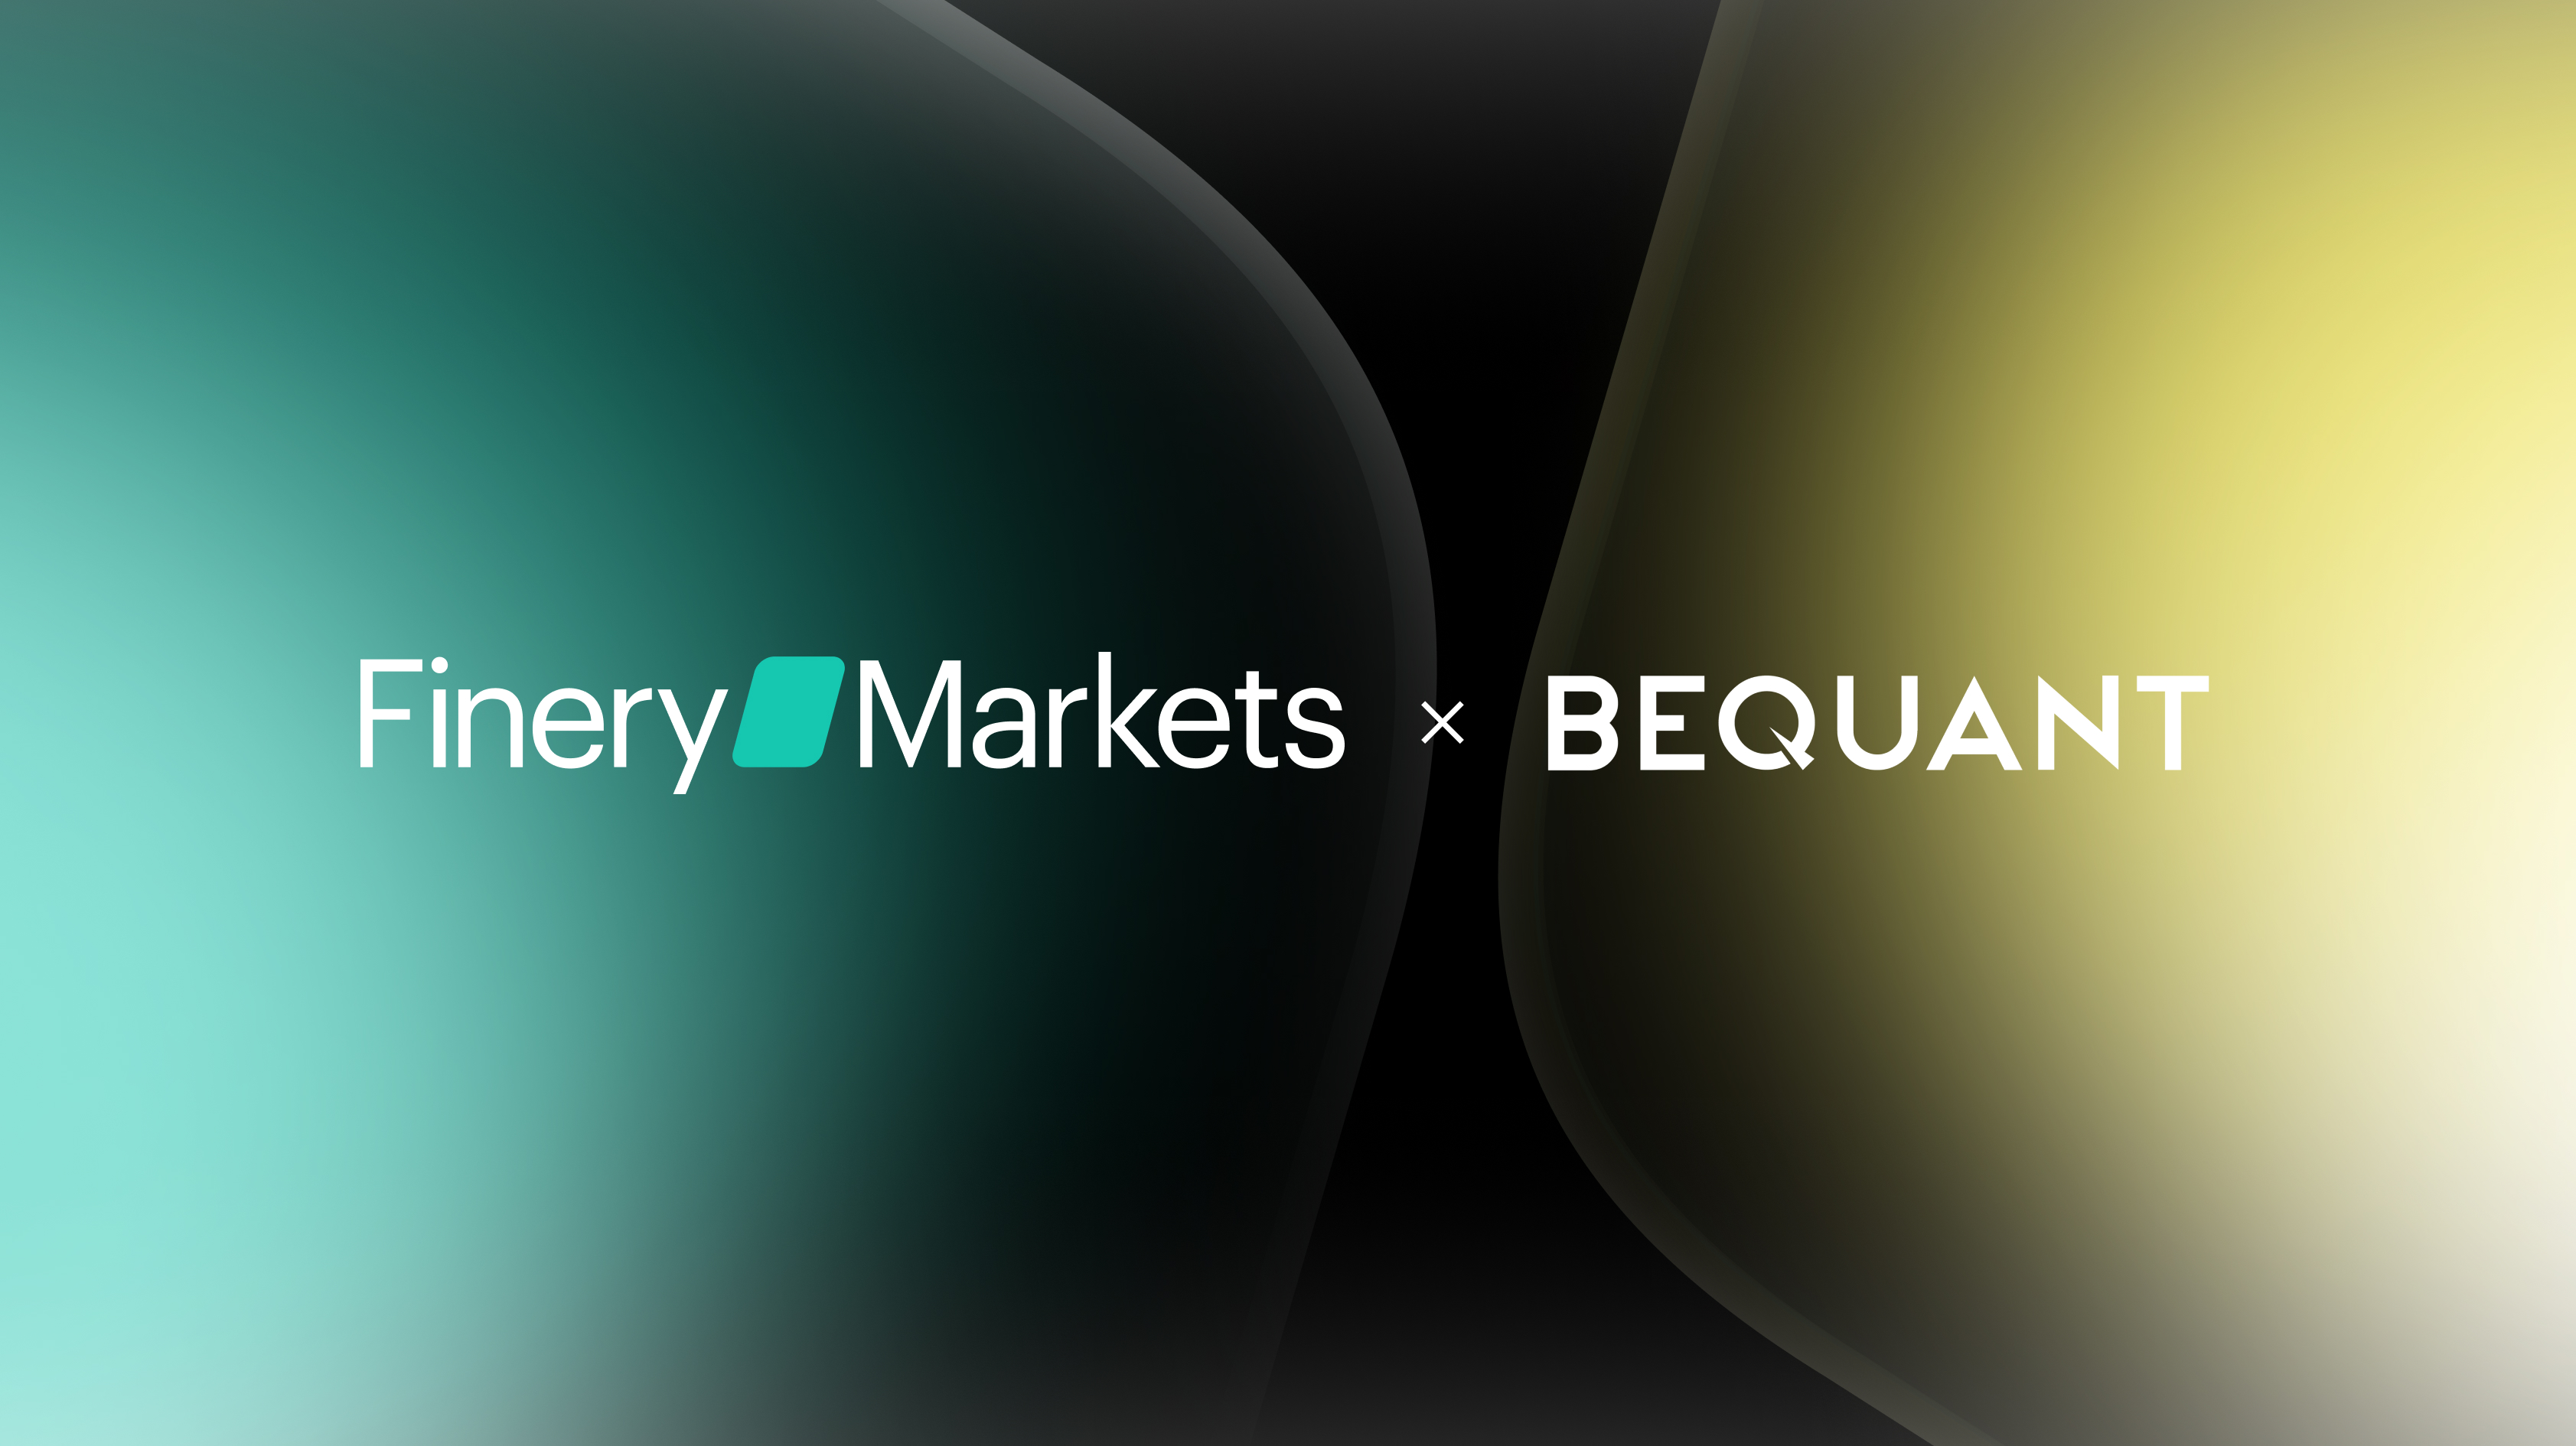 Bequant partners with Finery Markets to offer crypto OTC prime brokerage through FM Liquidity Match